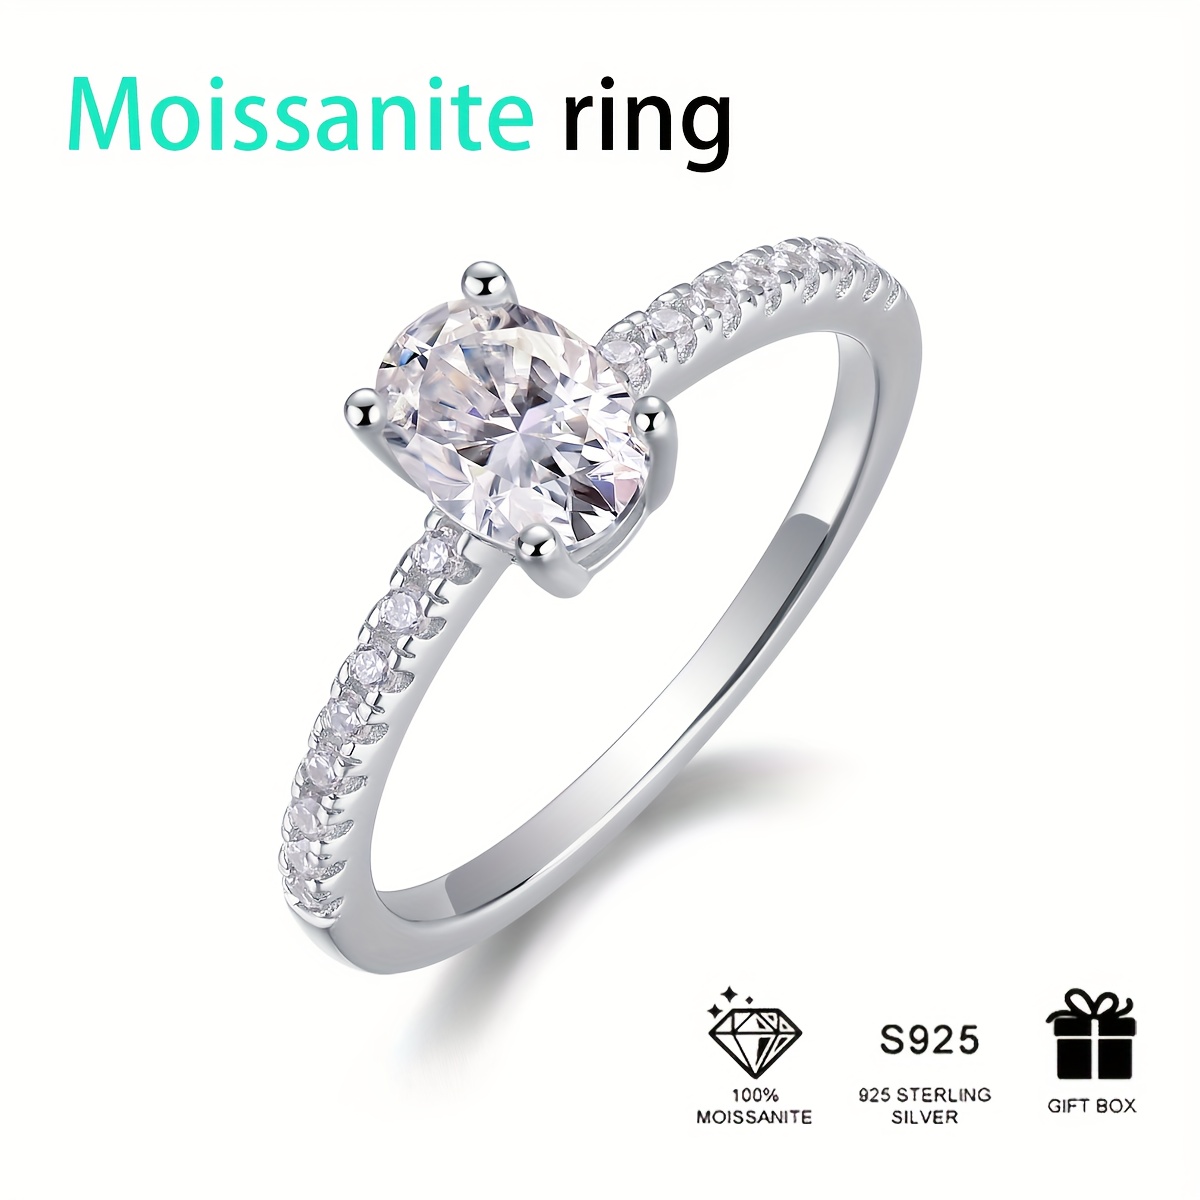 1 Carat Moissanite engagement and wedding Ring -925 sterling silver - perfect for banquets, parties and official occasions - anniversary gifts